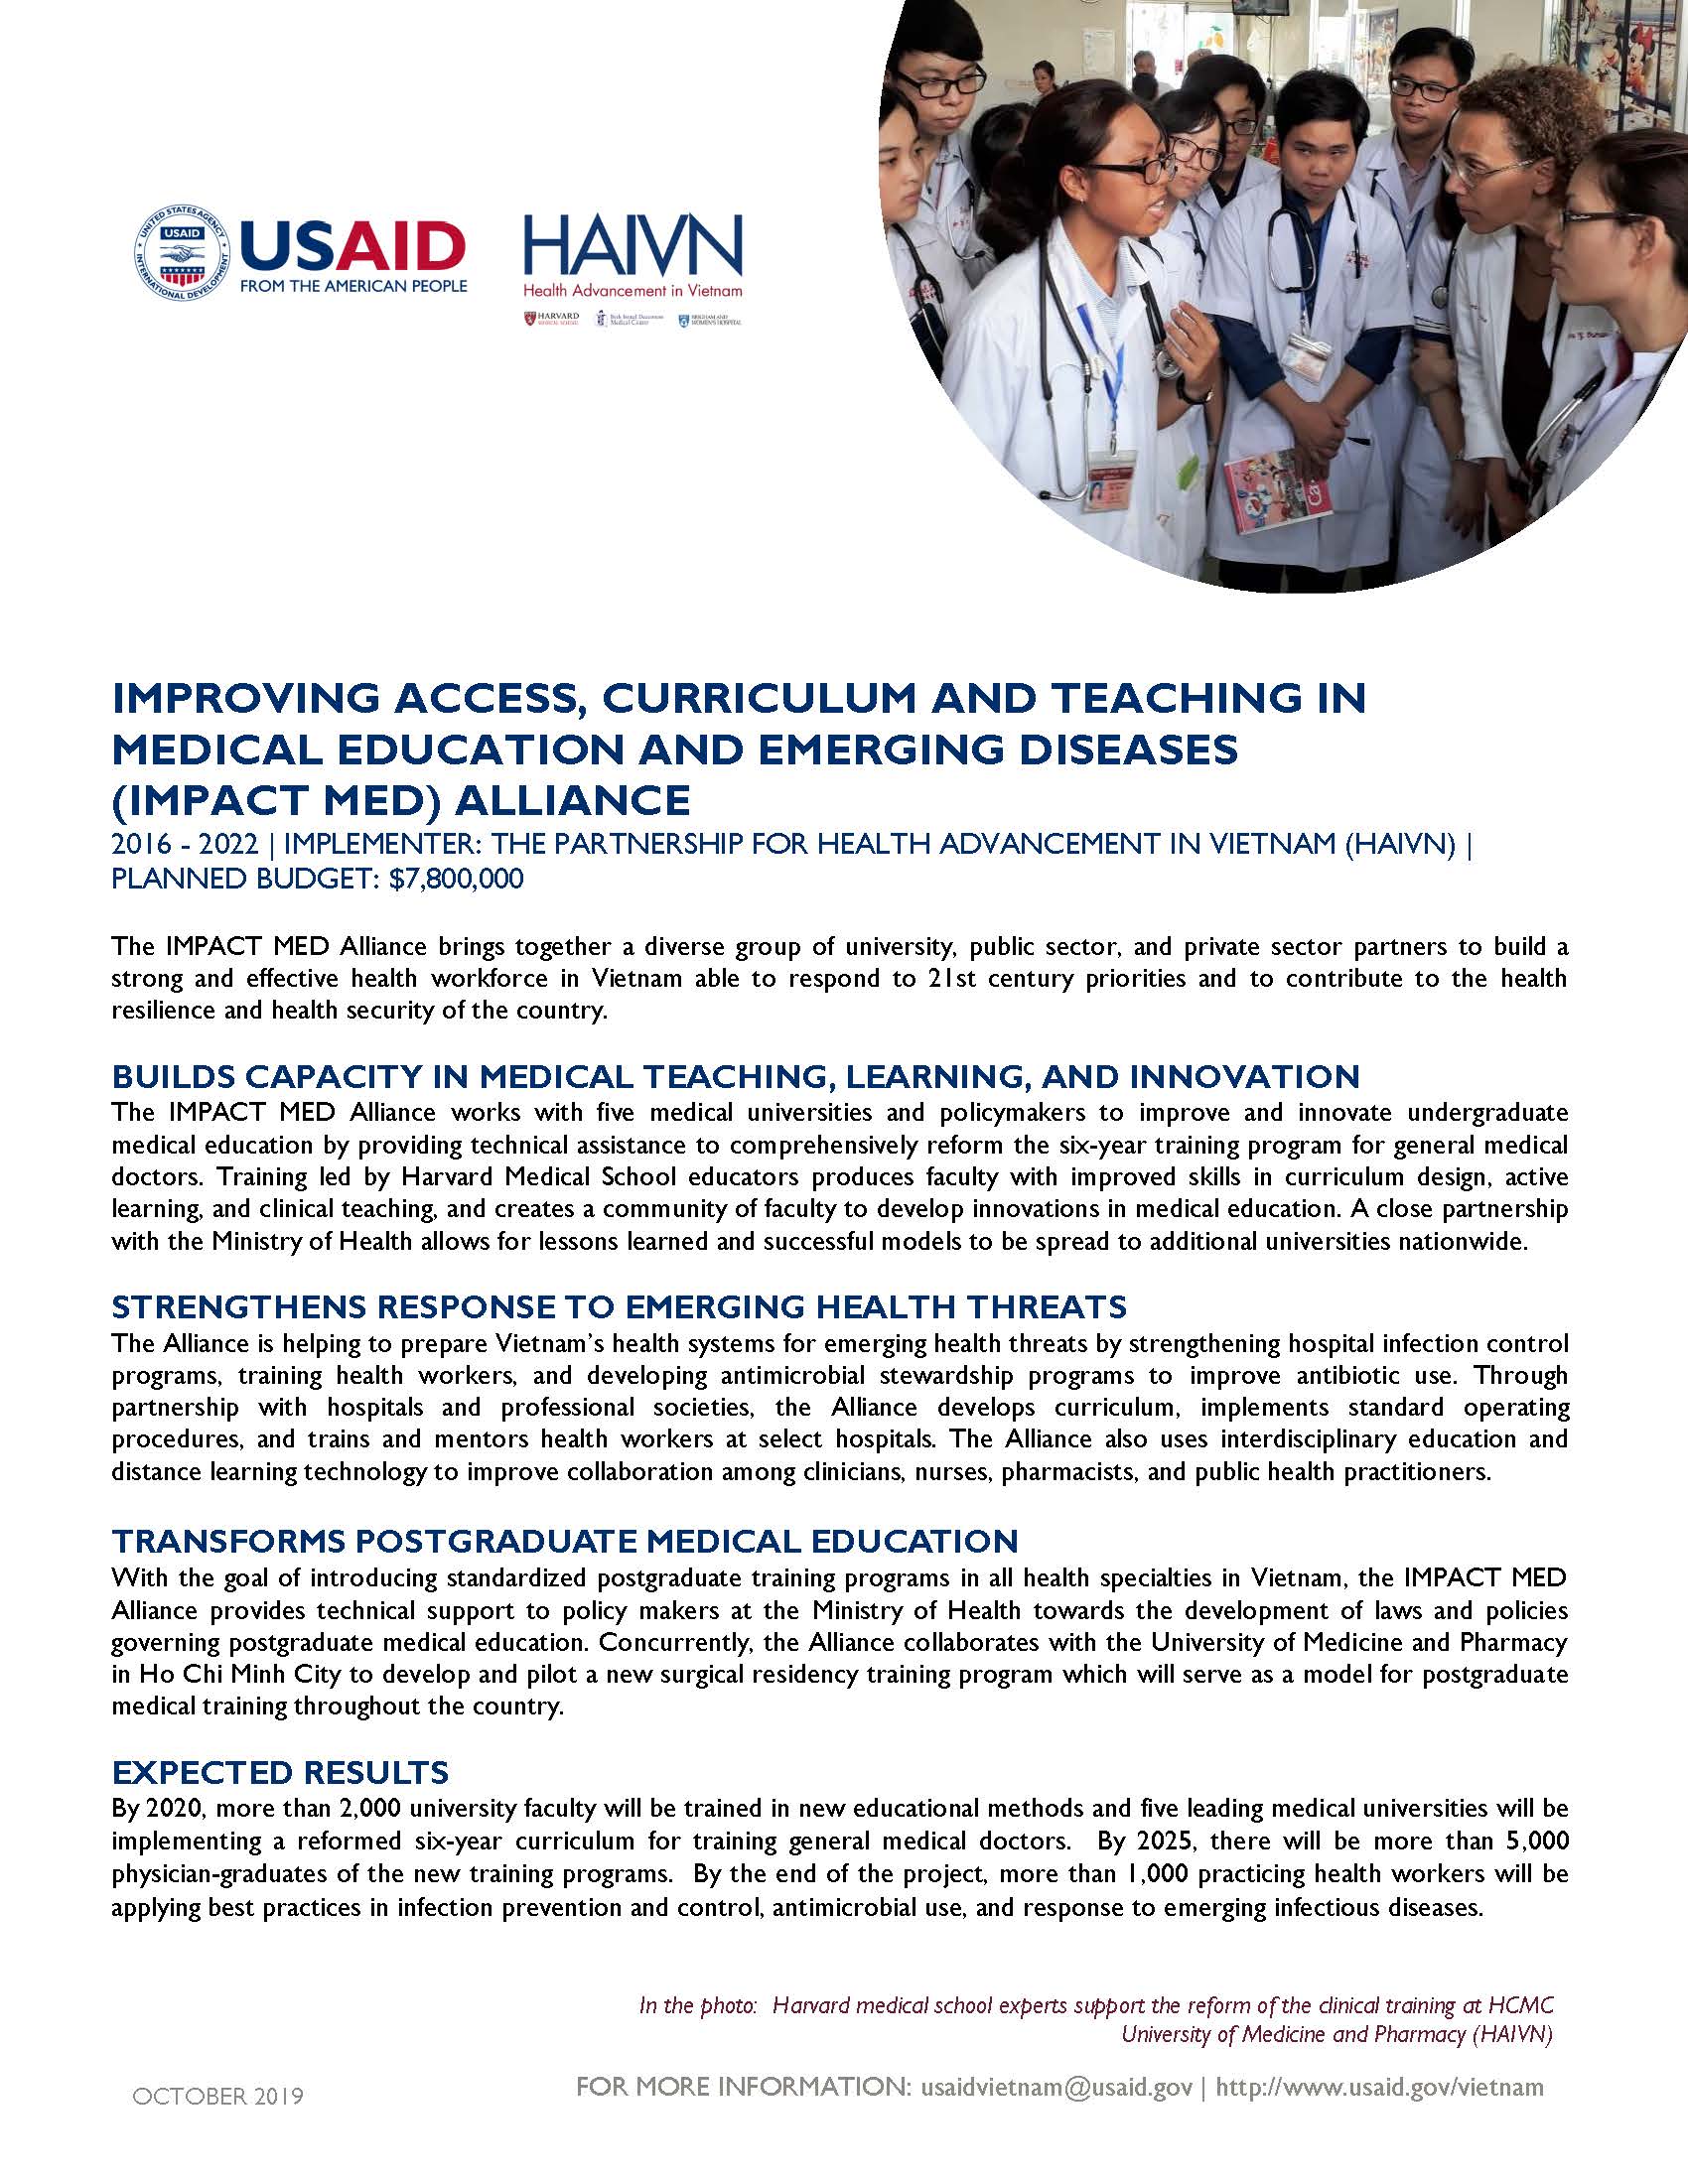 Fact Sheet: Improving Access, Curriculum and Teaching in Medical Education and Emerging Diseases (IMPACT MED) Alliance